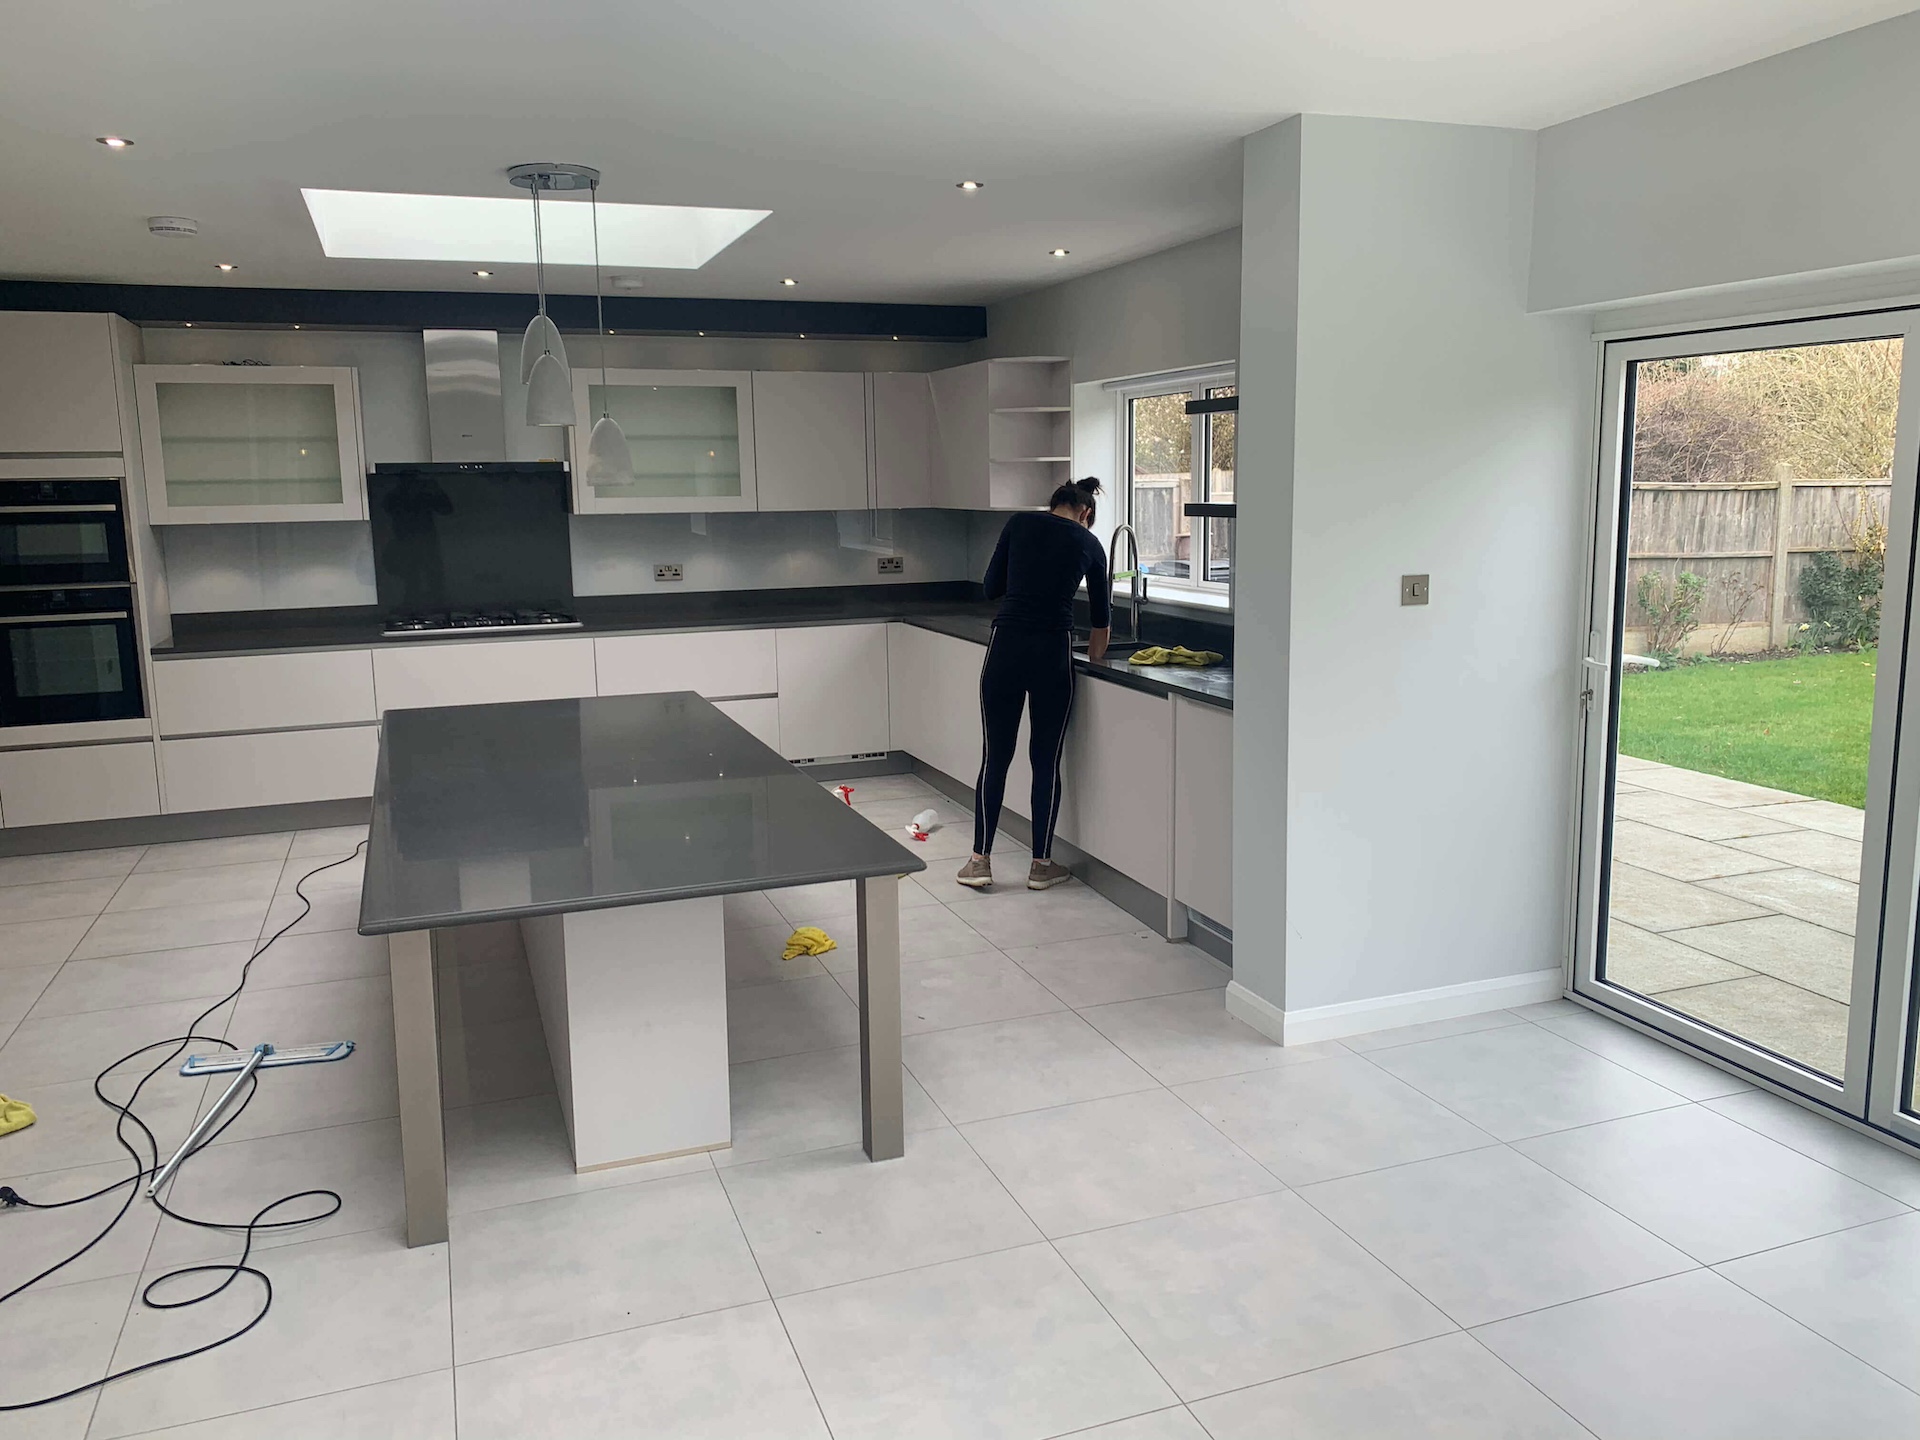 Professional female cleaner from Cleaningsure actively working during an end of lease cleaning in Wandsworth, SW18, equipped with eco-friendly cleaning products and tools, ensuring a thorough and environmentally safe clean for a residential property.